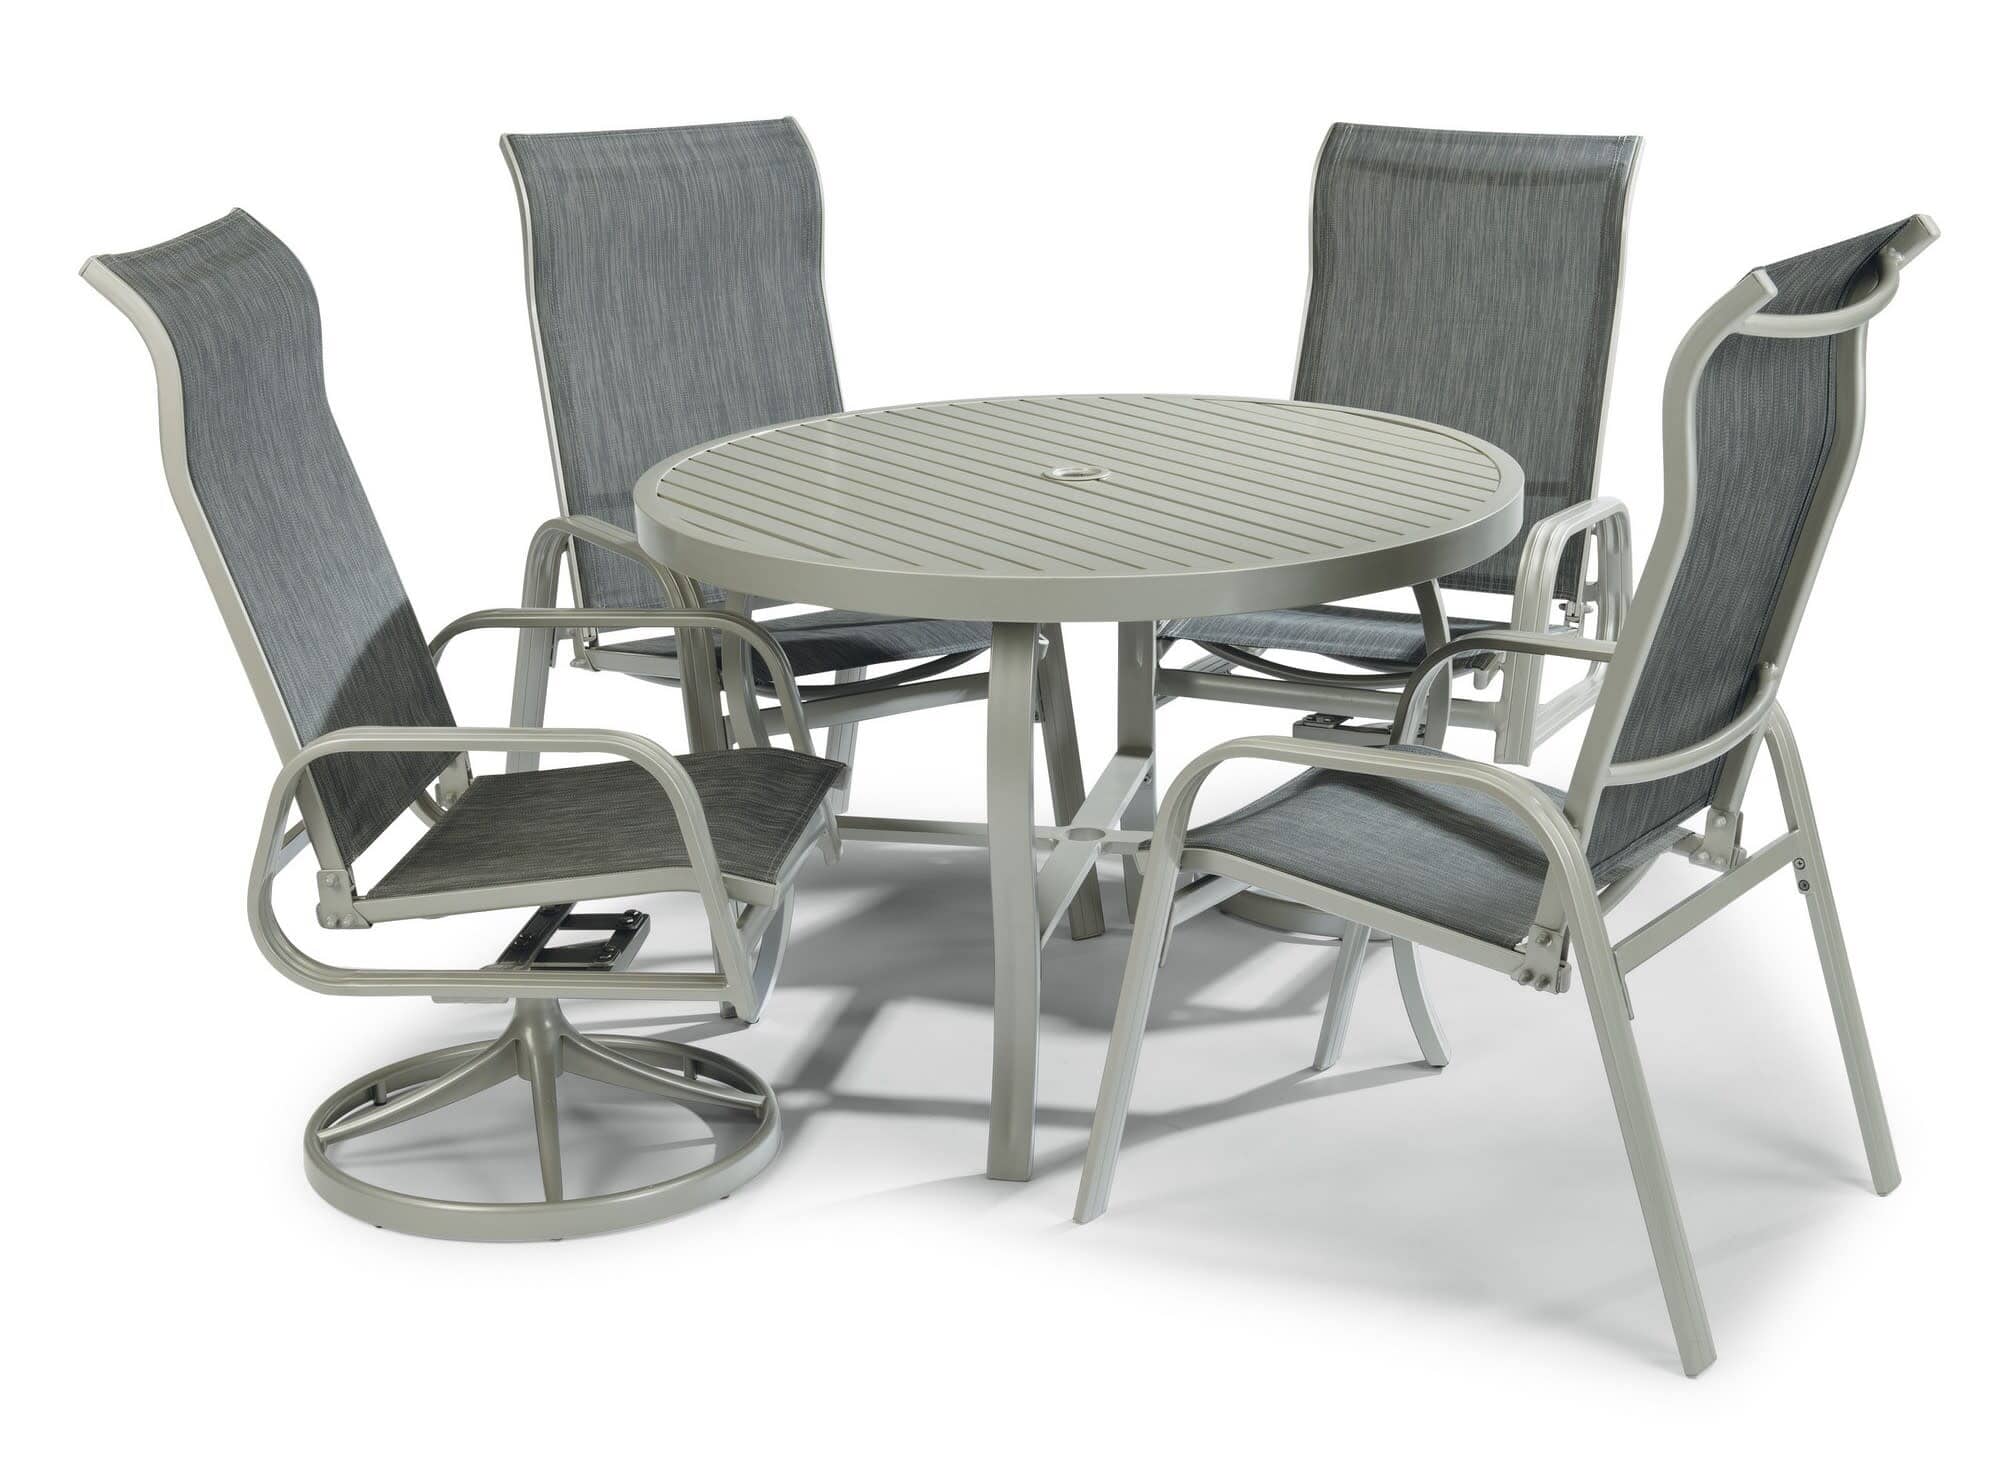 Modern & Contemporary 5 Piece Outdoor Dining Set By Captiva Dining Table & Chairs Captiva